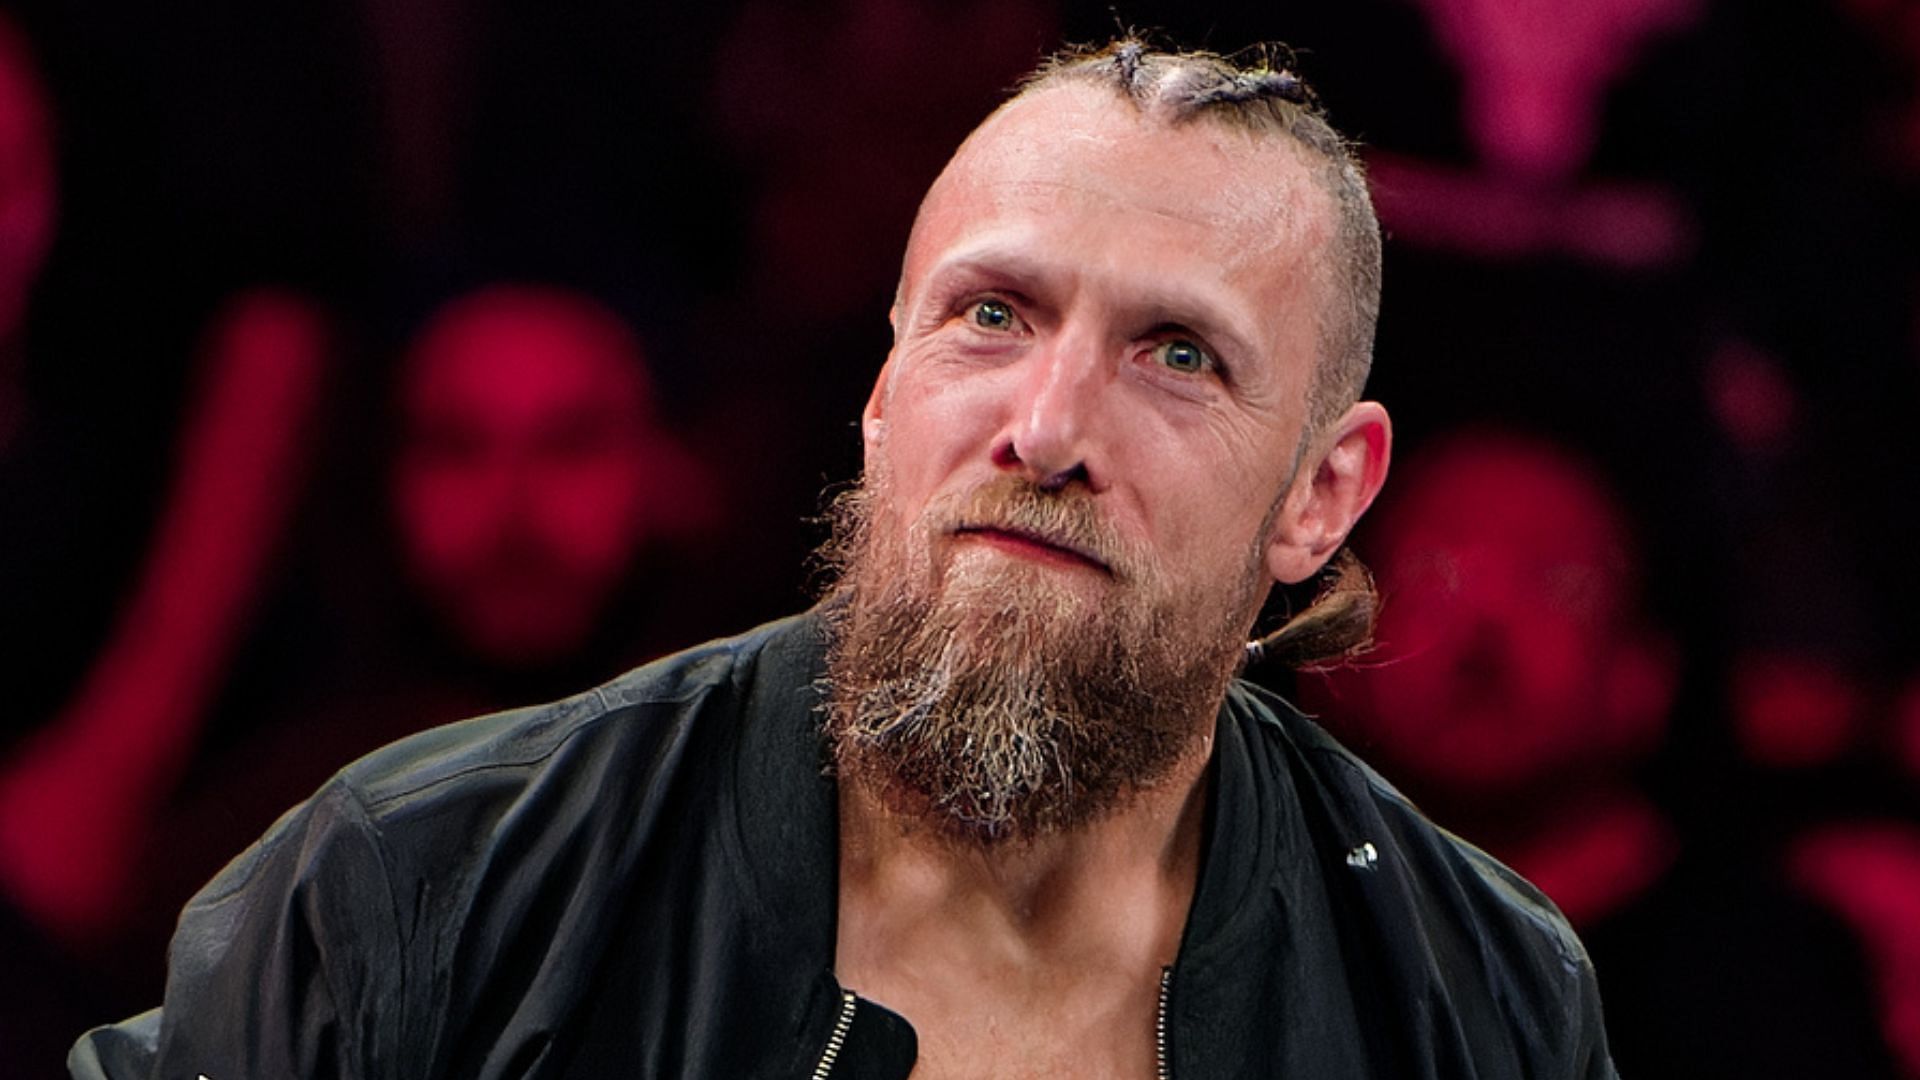 What match has been scrapped because of Bryan Danielson